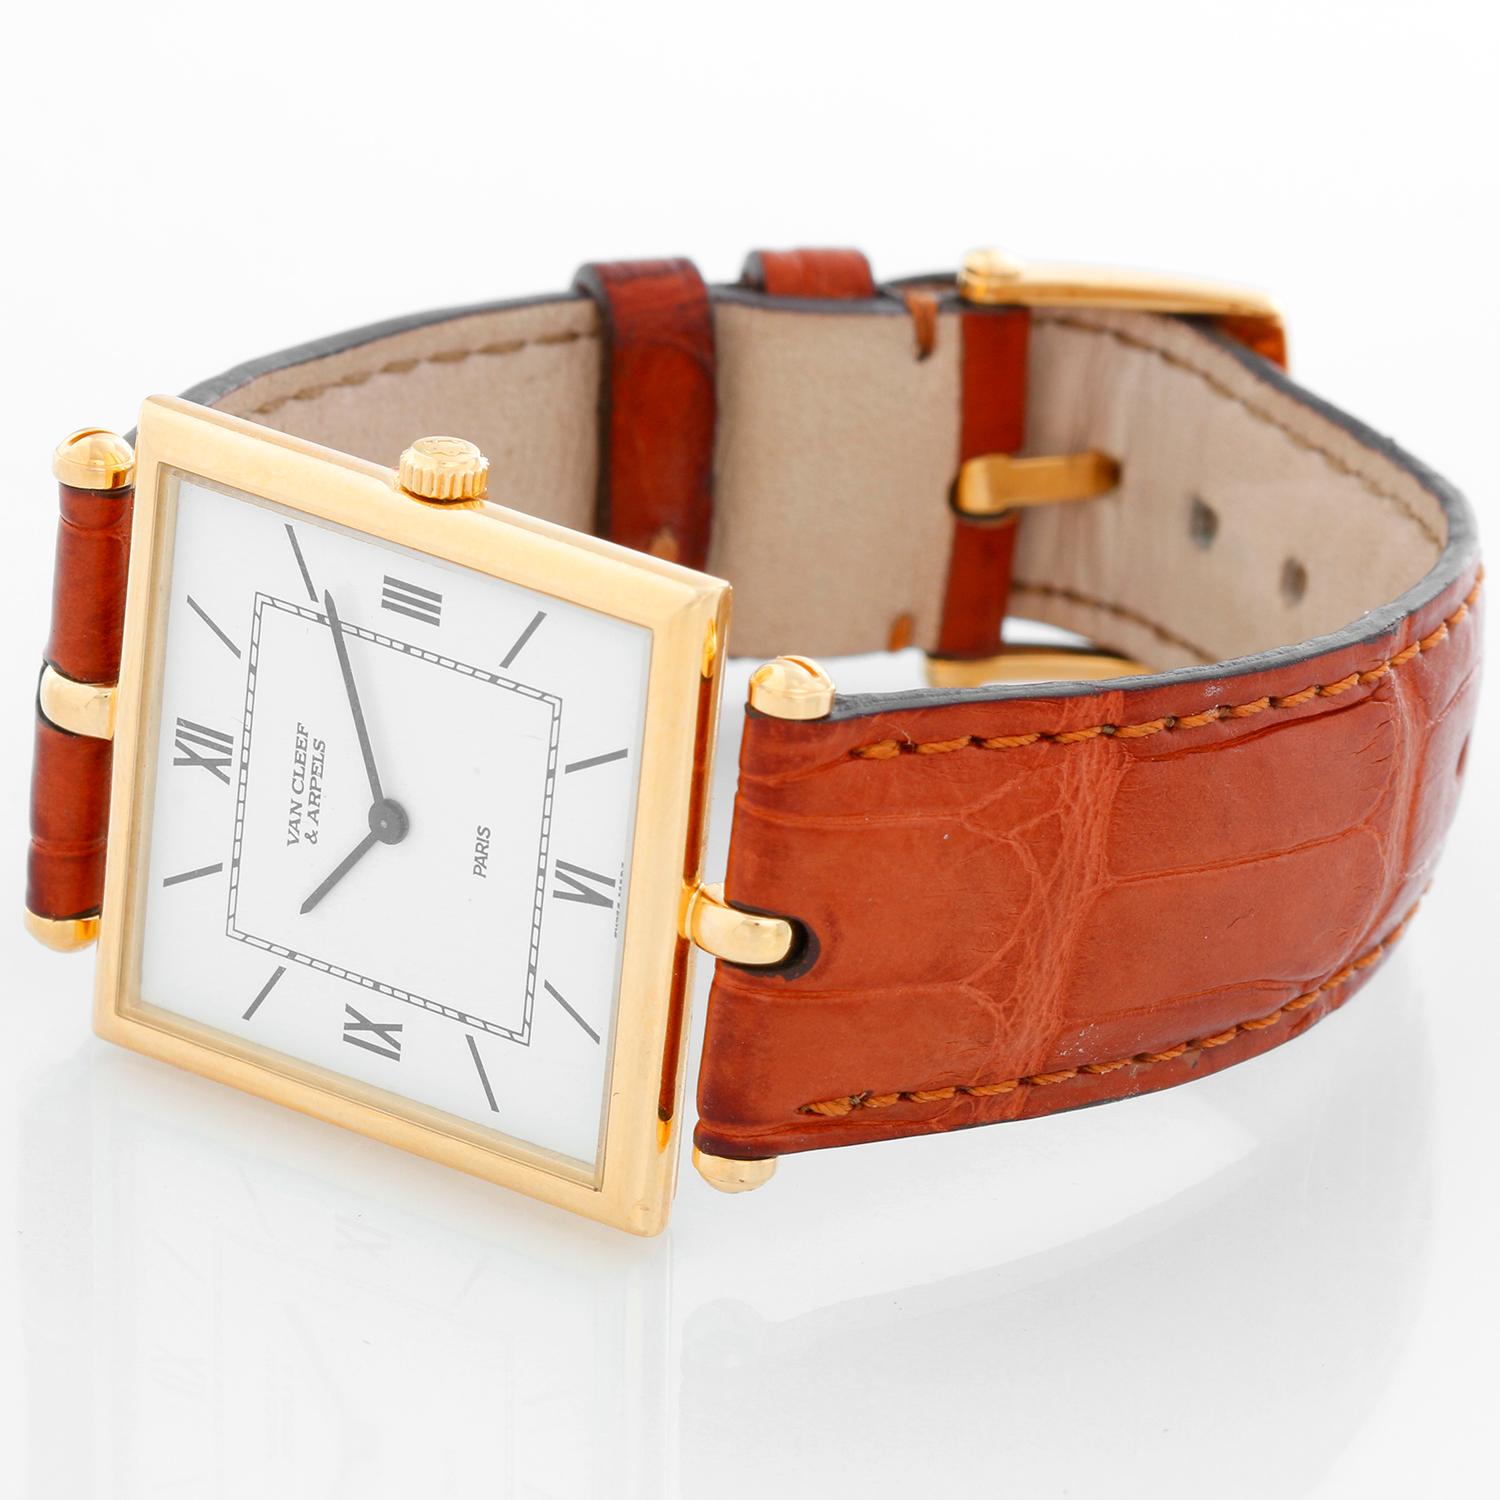 Van Cleef & Arpels Quartz Yellow Gold Oversize Ladies Watch - Quartz. 18K Yellow gold case ( 28 mm). White dial with Roman and stick hour markers. Brown leather Van Cleef & Arpels strap band with 18K Yellow gold V & A tang buckle. Pre-owned with Van